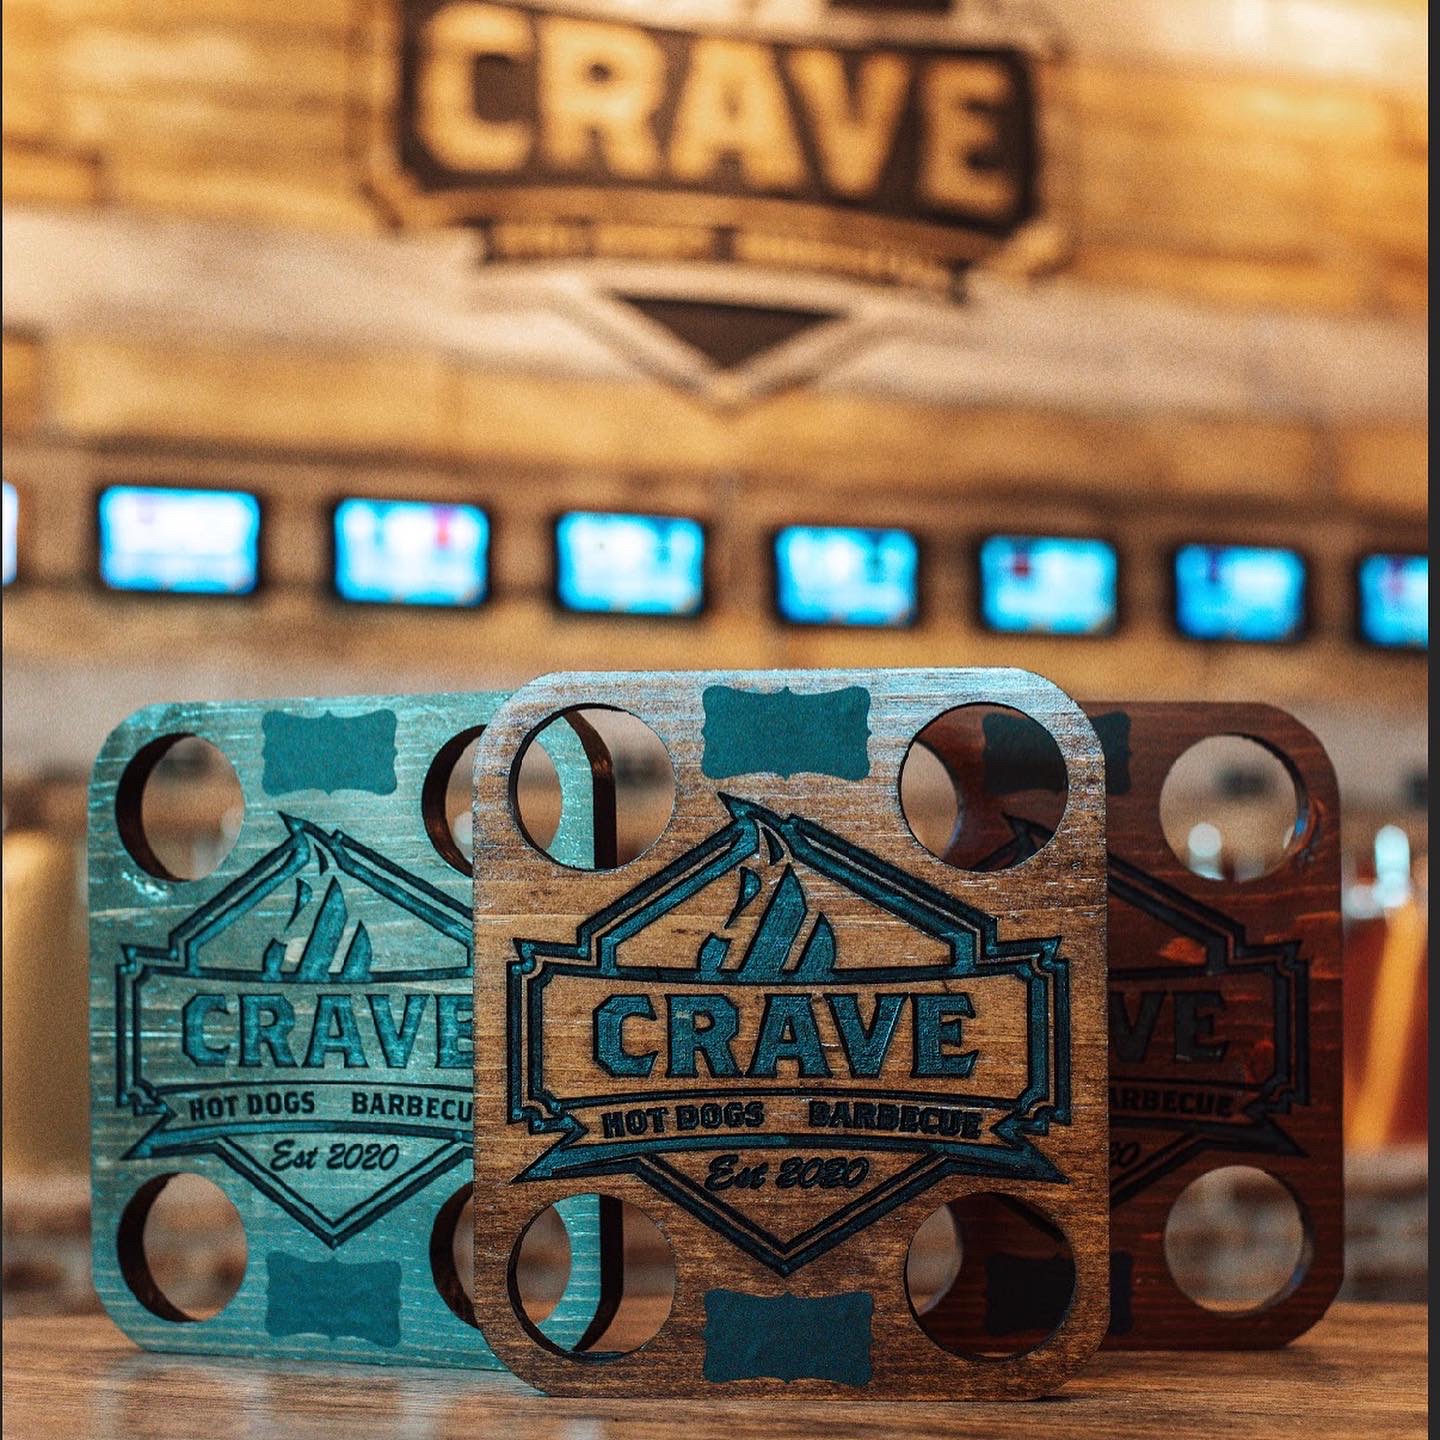 Crave Hot Dogs & BBQ: Colorado Springs